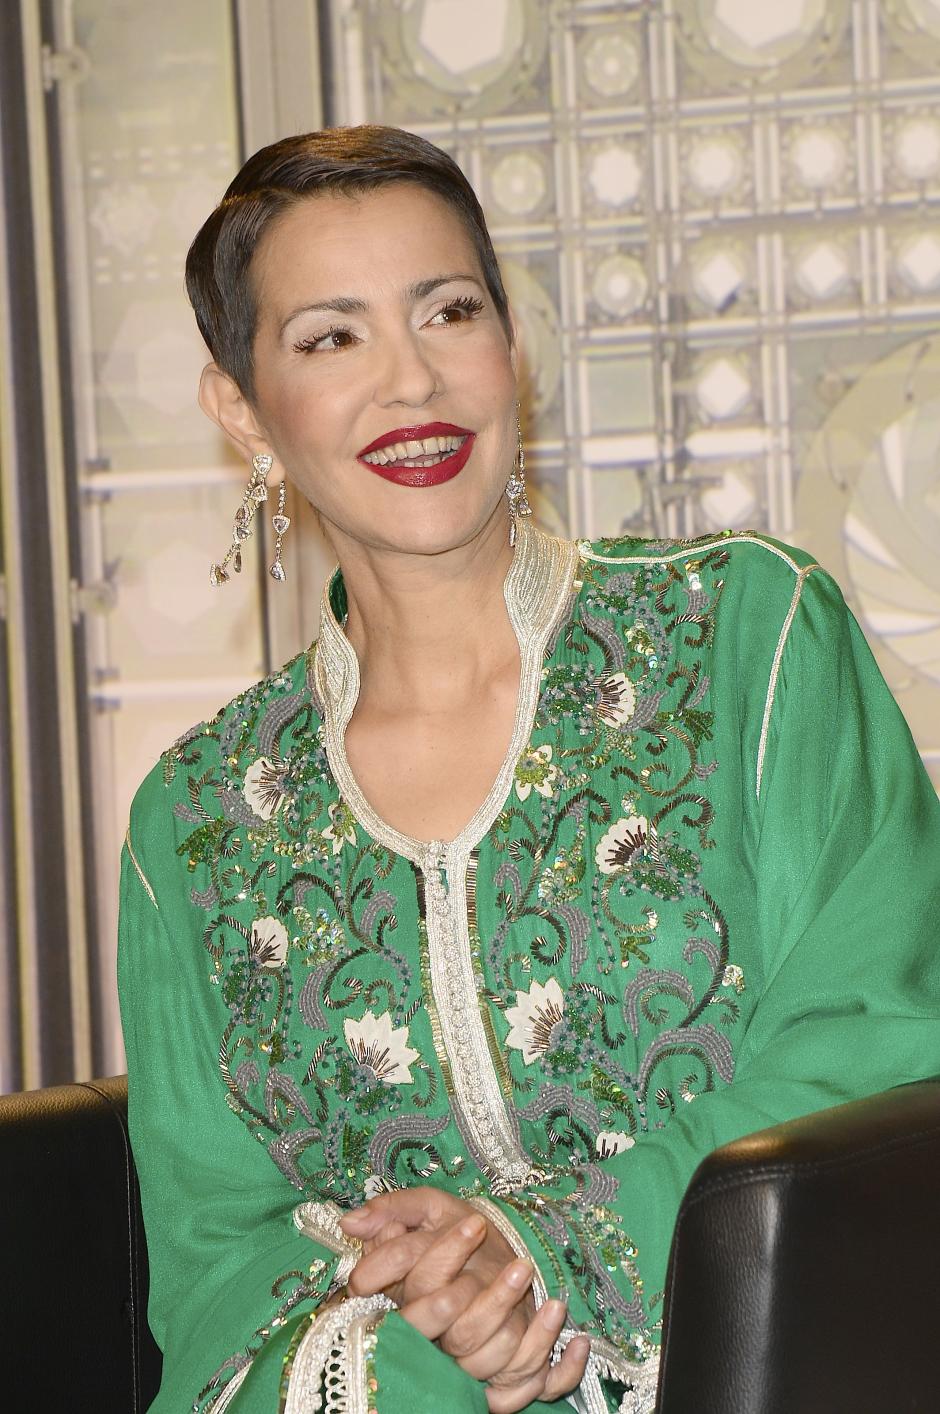 S.A.R. Princess Lalla Meryem of Morocco during event the three monotheistic religions in France, Muslim, Jewish and Christian at the Arab World Institute in Paris on February 1, 2015.